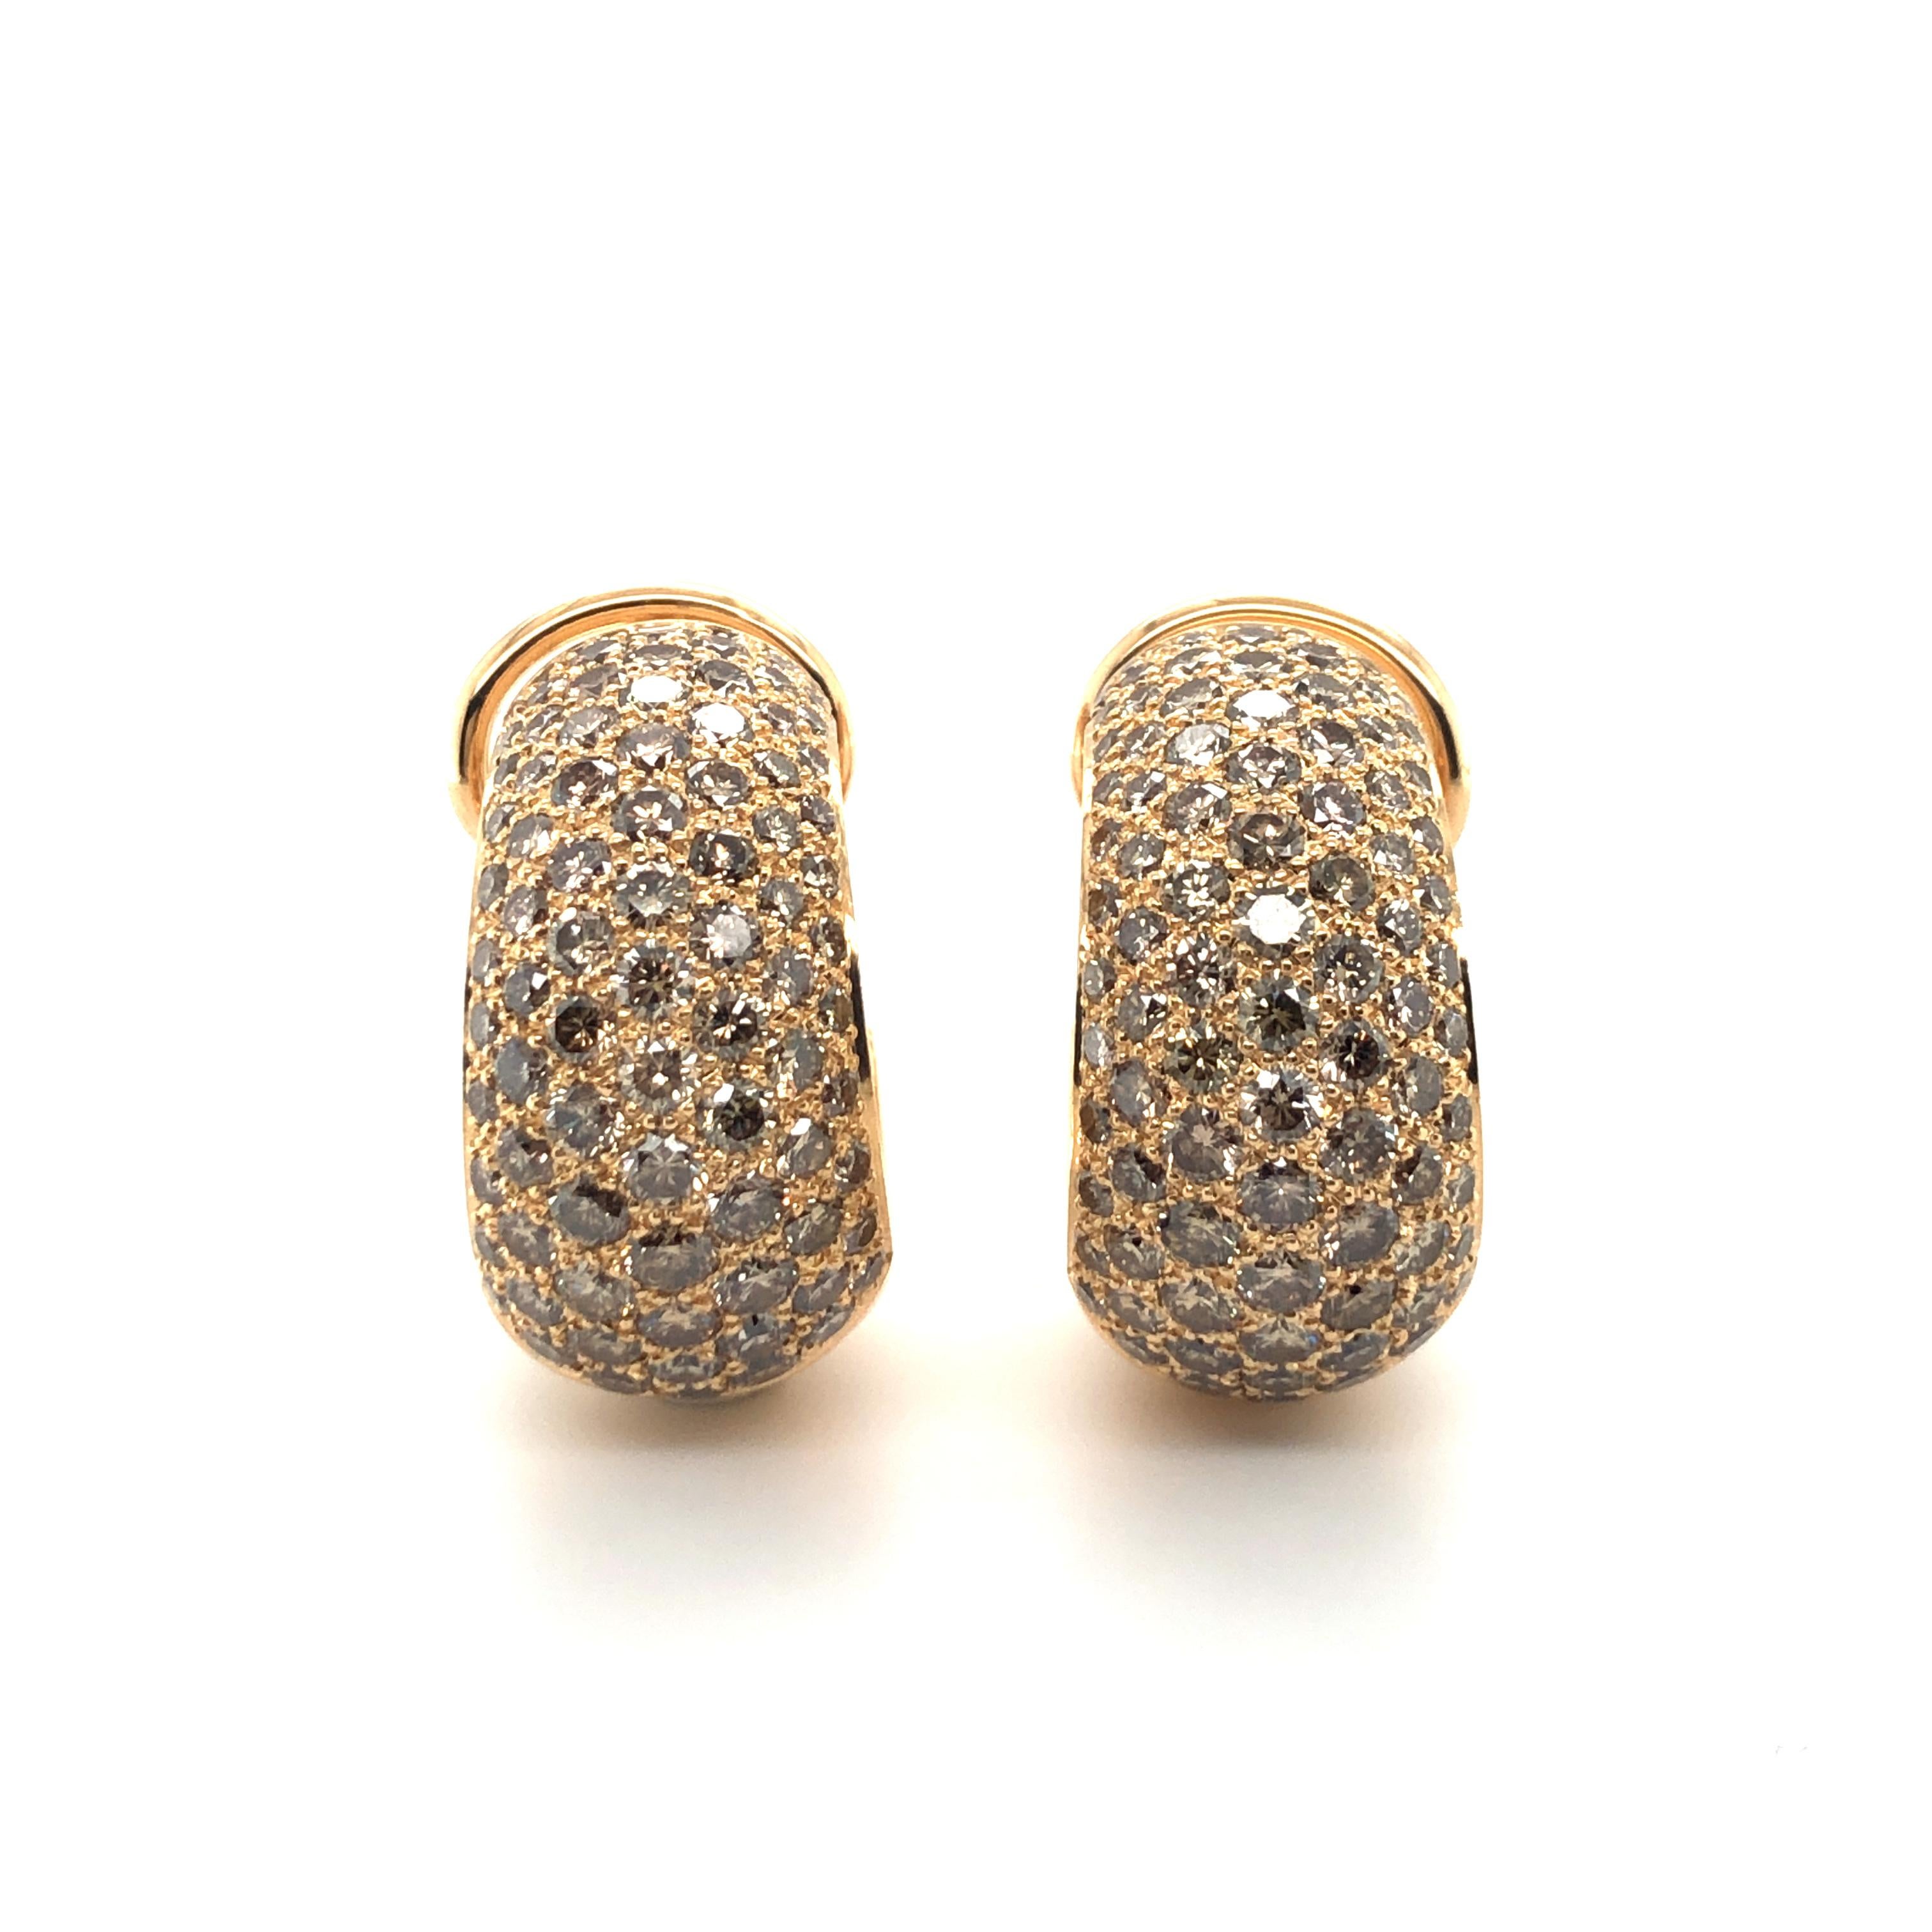 This superb pair of handcrafted earclips in 18 karat rose gold by renowned Swiss jeweller Majo Fruithof is pavé set with 178 brilliant-cut diamonds of medium champagne hue and vs clarity, total weight approximately 5.30 carats.
Due to their